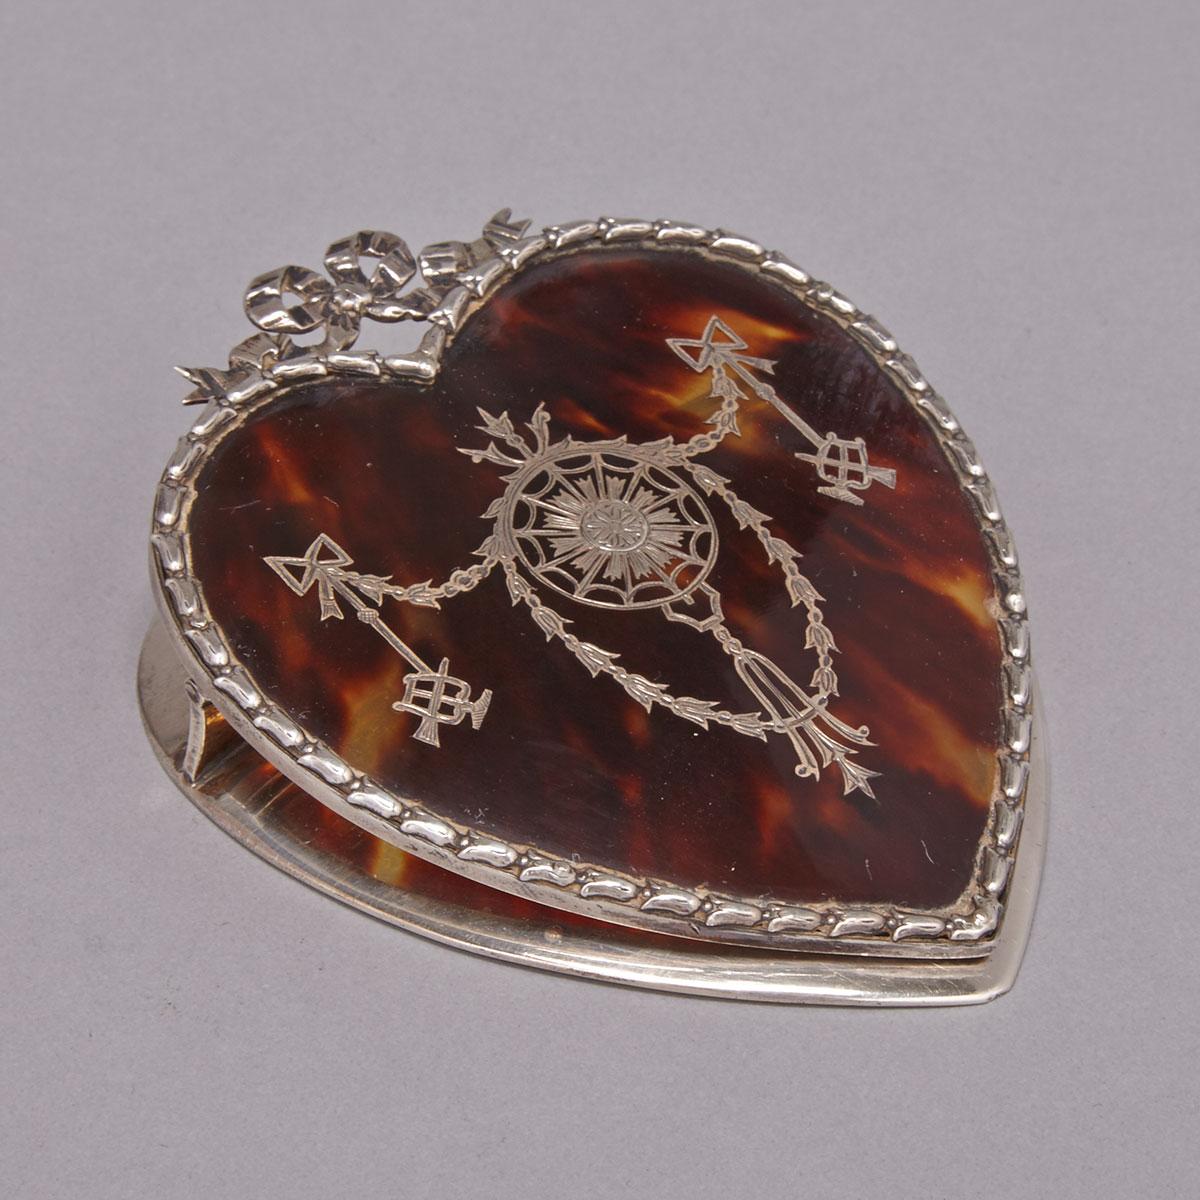 Edwardian Engraved Silver and Tortoiseshell Heart Shaped Paper Clip, William Comyns, London, 1907